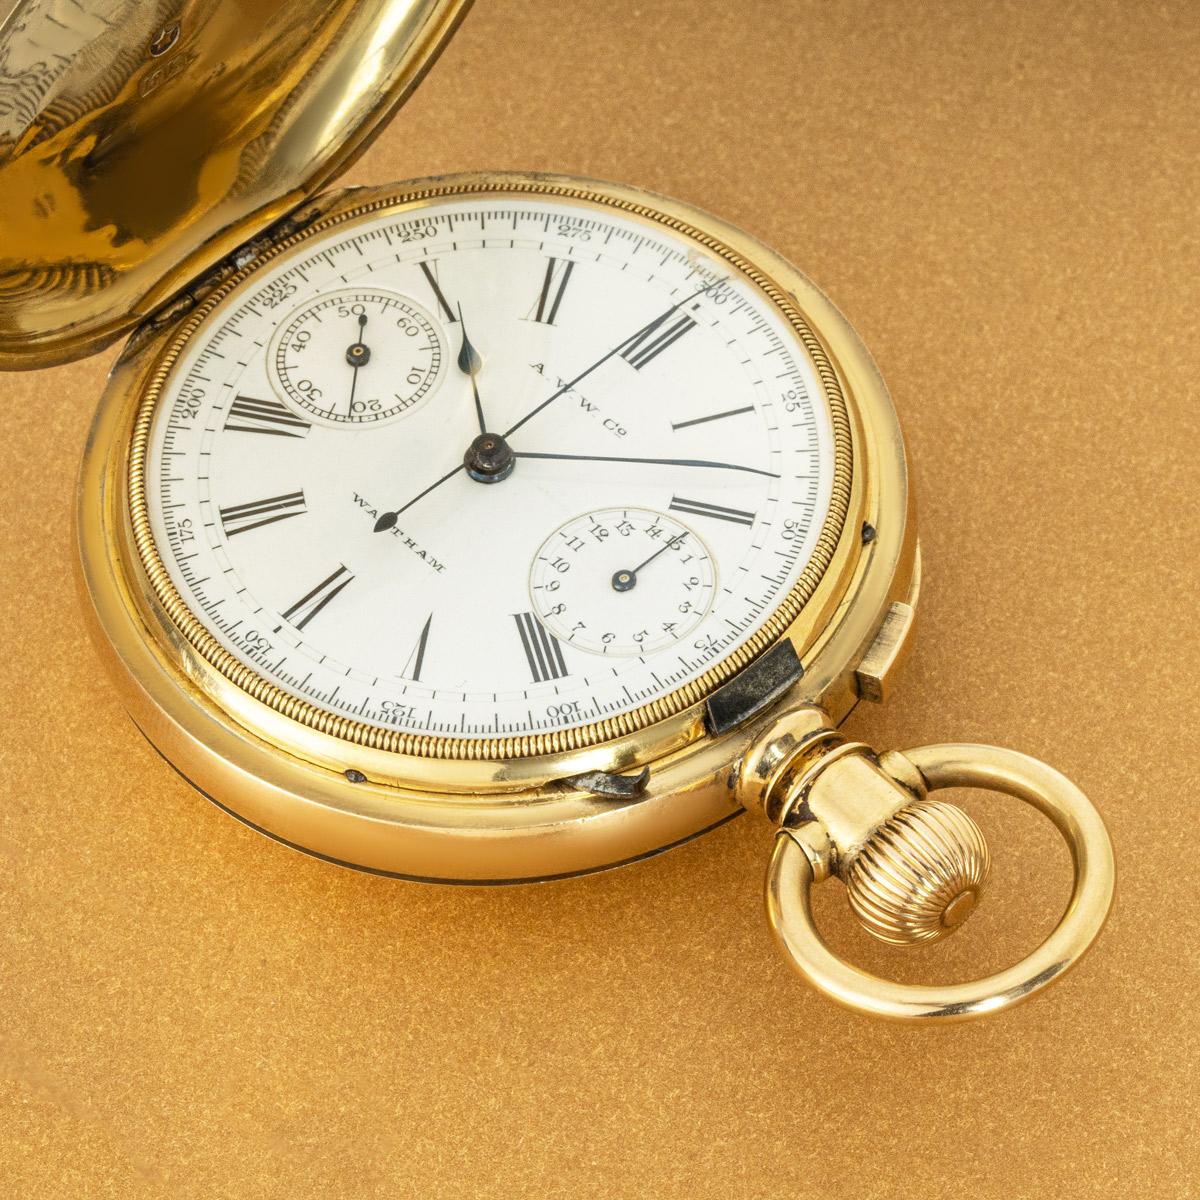 Waltham Riverside. A Rare Heavy Gold Keyless Lever Chronograph Hunter Pocket Watch C1884.

Dial: The white enamel dial with Roman numerals outer minute track, signed A.W.W. Co at twelve o'clock and Waltham at six o'clock. The unusual layout of the